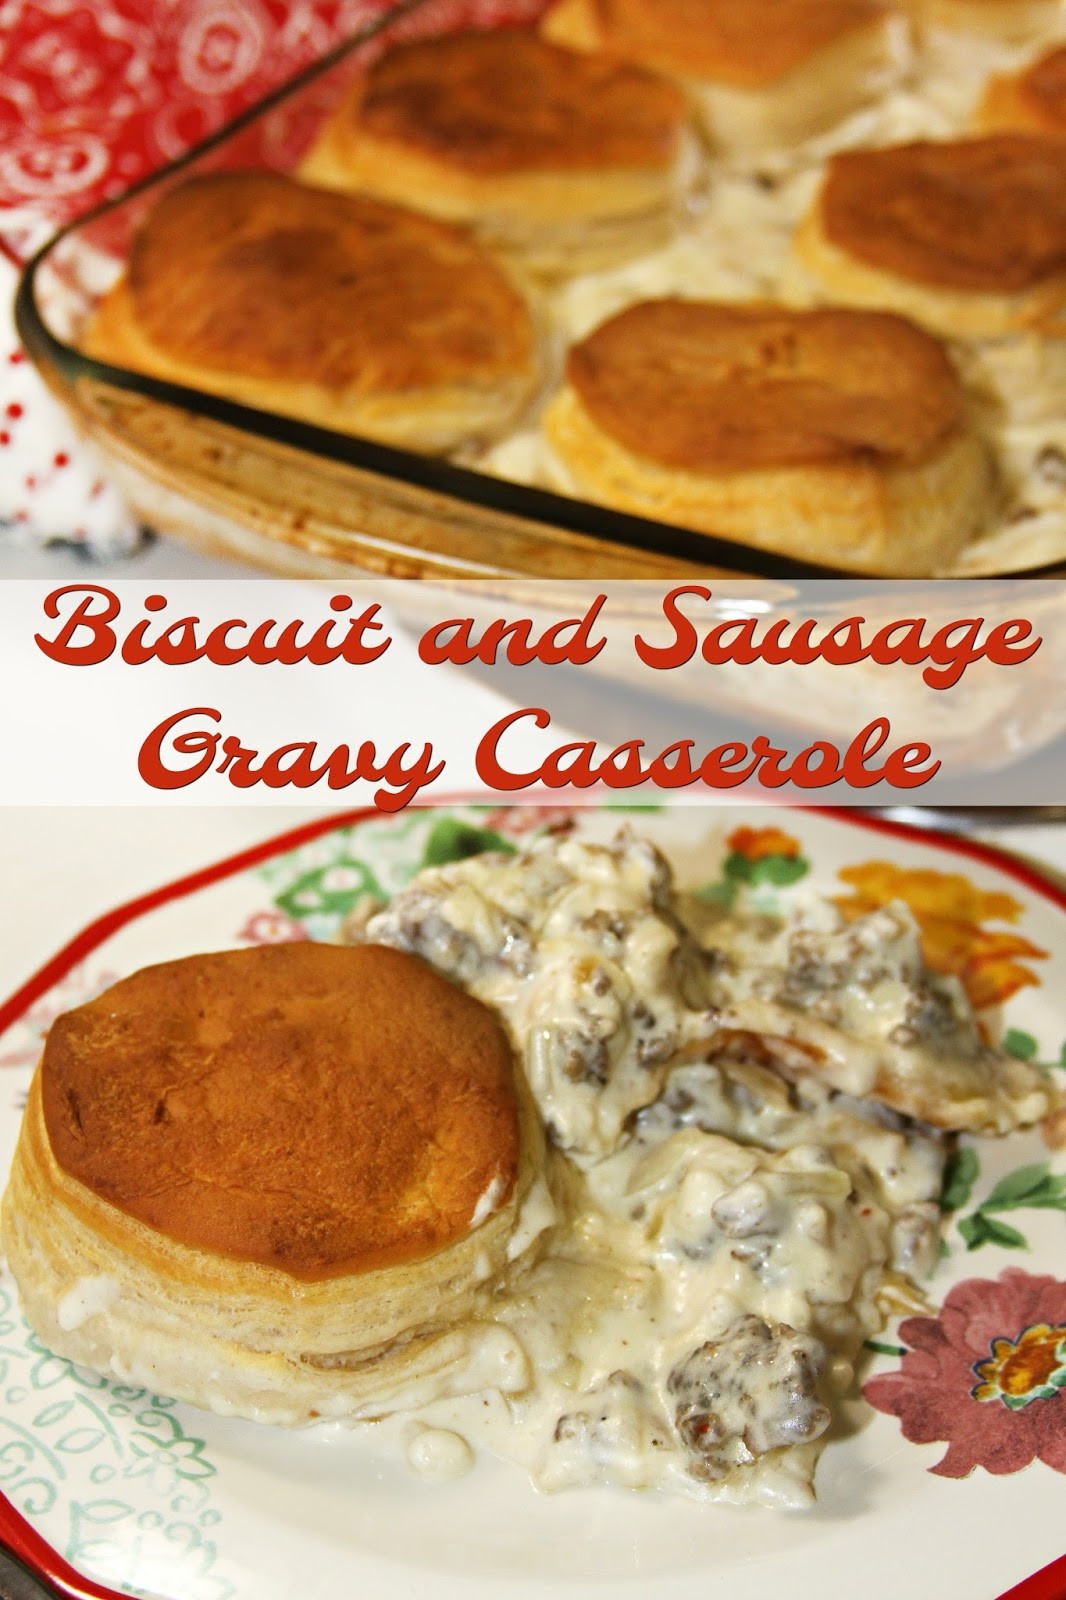 Sausage And Biscuit Casserole
 For the Love of Food Biscuit and Sausage Gravy Casserole